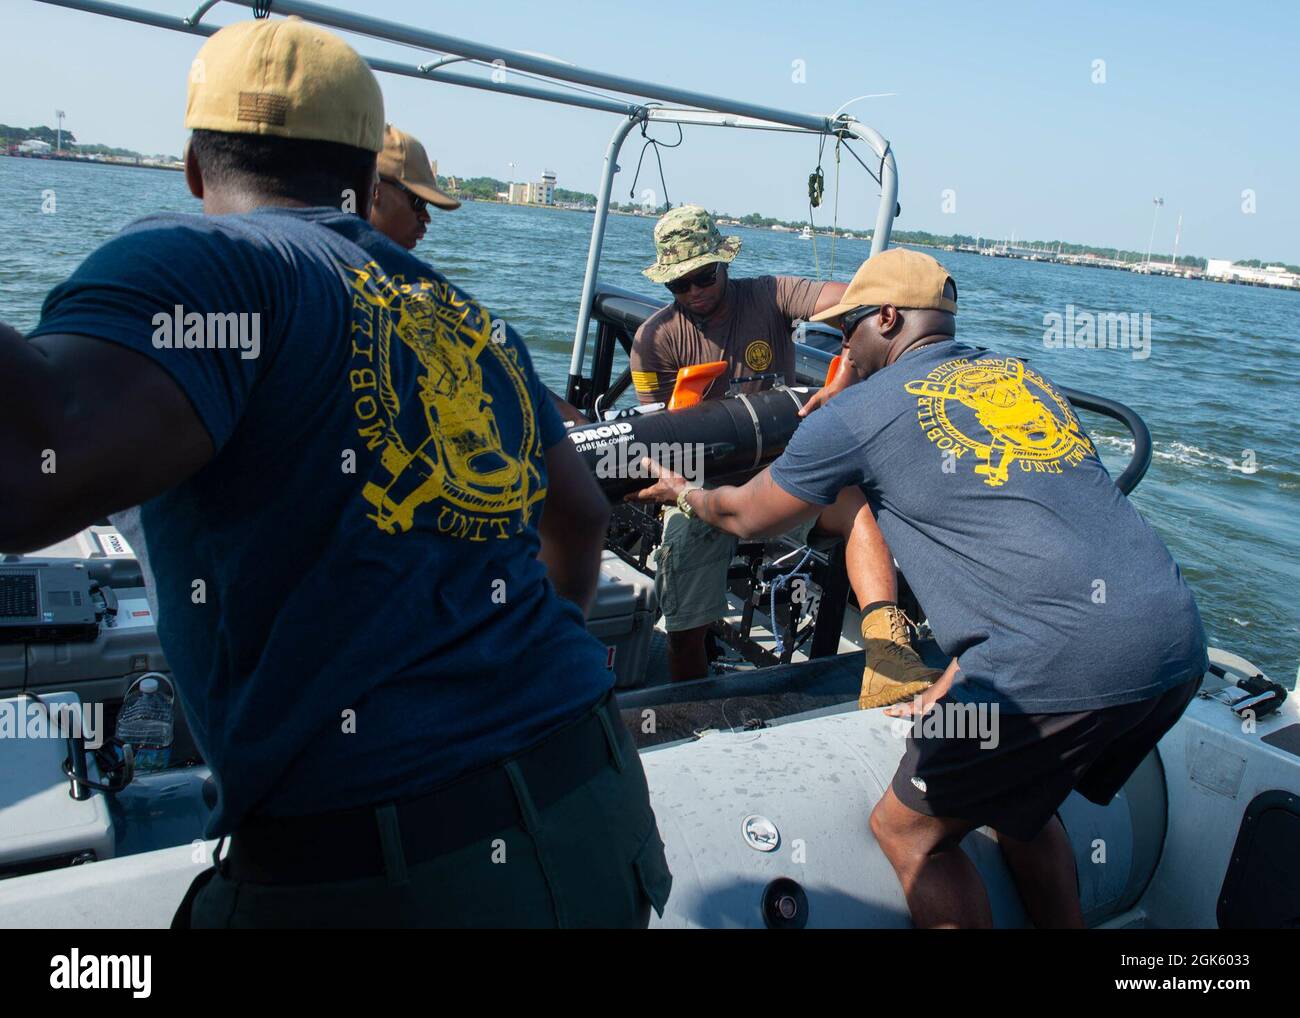 VIRGINIA BEACH, Va. (Aug. 12, 2021) – Sailors assigned to Mobile Diving and Salvage Unit 2 area search platoon prepare to scan a harbor bottom with a Mk 18 Mod 1 unmanned undersea vehicle for unexploded ordnance and other potential hazards during a port damage repair drill as part of Large-Scale Exercise (LSE) 2021 at Joint Expeditionary Base Little Creek-Fort Story. LSE 2021 merges live and synthetic training capabilities to create an intense, robust training environment. It will connect high-fidelity training and real-world operations to build knowledge and skills needed in today’s complex, Stock Photo